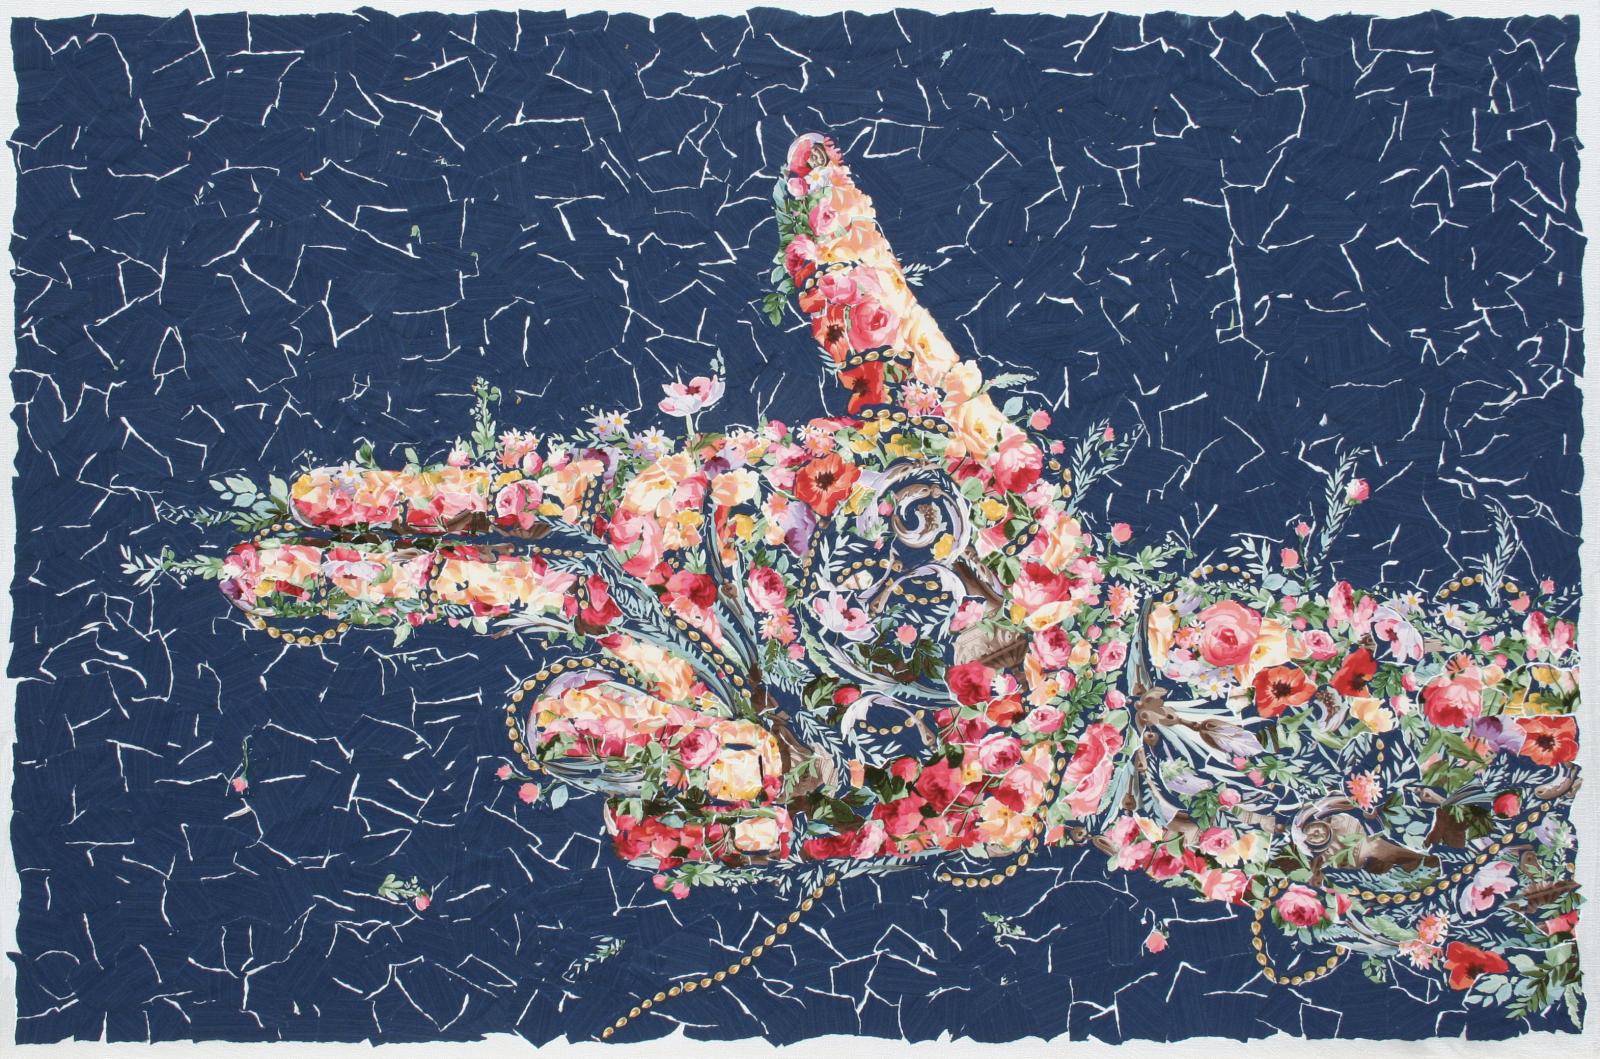 Charm City (a reference to Baltimore’s nickname), a 24 x 36-inch finger gun is depicted using a navy floral wallpaper with a gold chain running throughout. The viewer at first glance sees a hand constructed with lush floral imagery but, upon further reflection, she realizes the beauty inherent in the lovely chain and verdant foliage are transformed using the finger gun imagery into a more authentic, visceral representation of the city’s struggle with violence. Completing the scene are the torn navy pieces with their white edges simulating cracks in the artwork’s background and metaphorically the cracks within our society.  